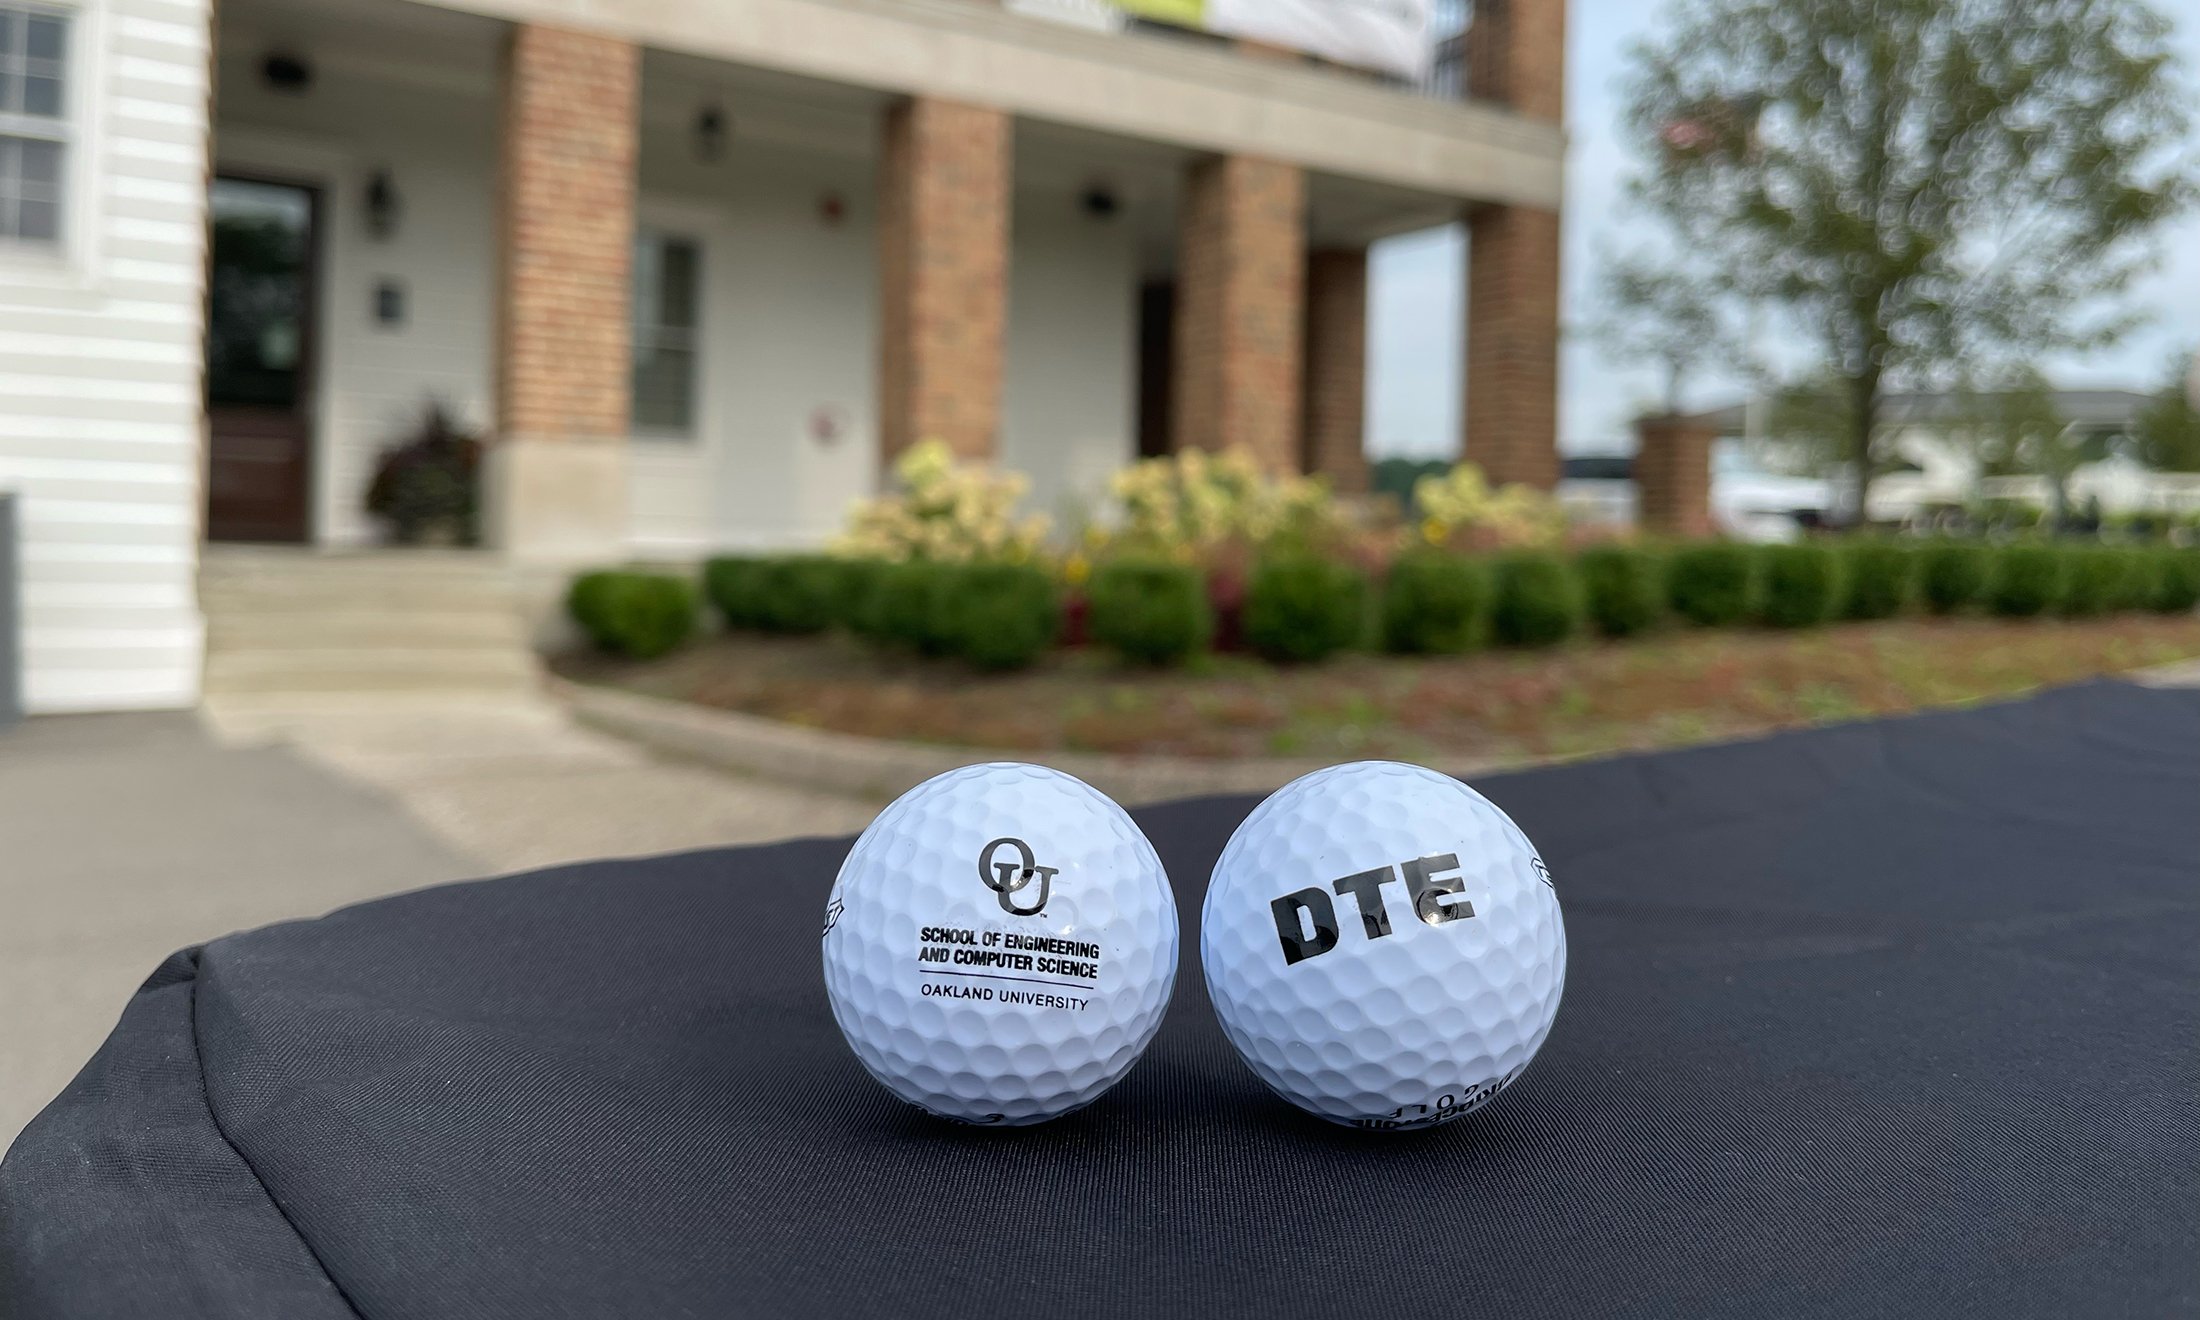 Two golf balls on a table, one reads "OU School of Engineering and Computer Sciences Oakland University" the other "DTE"